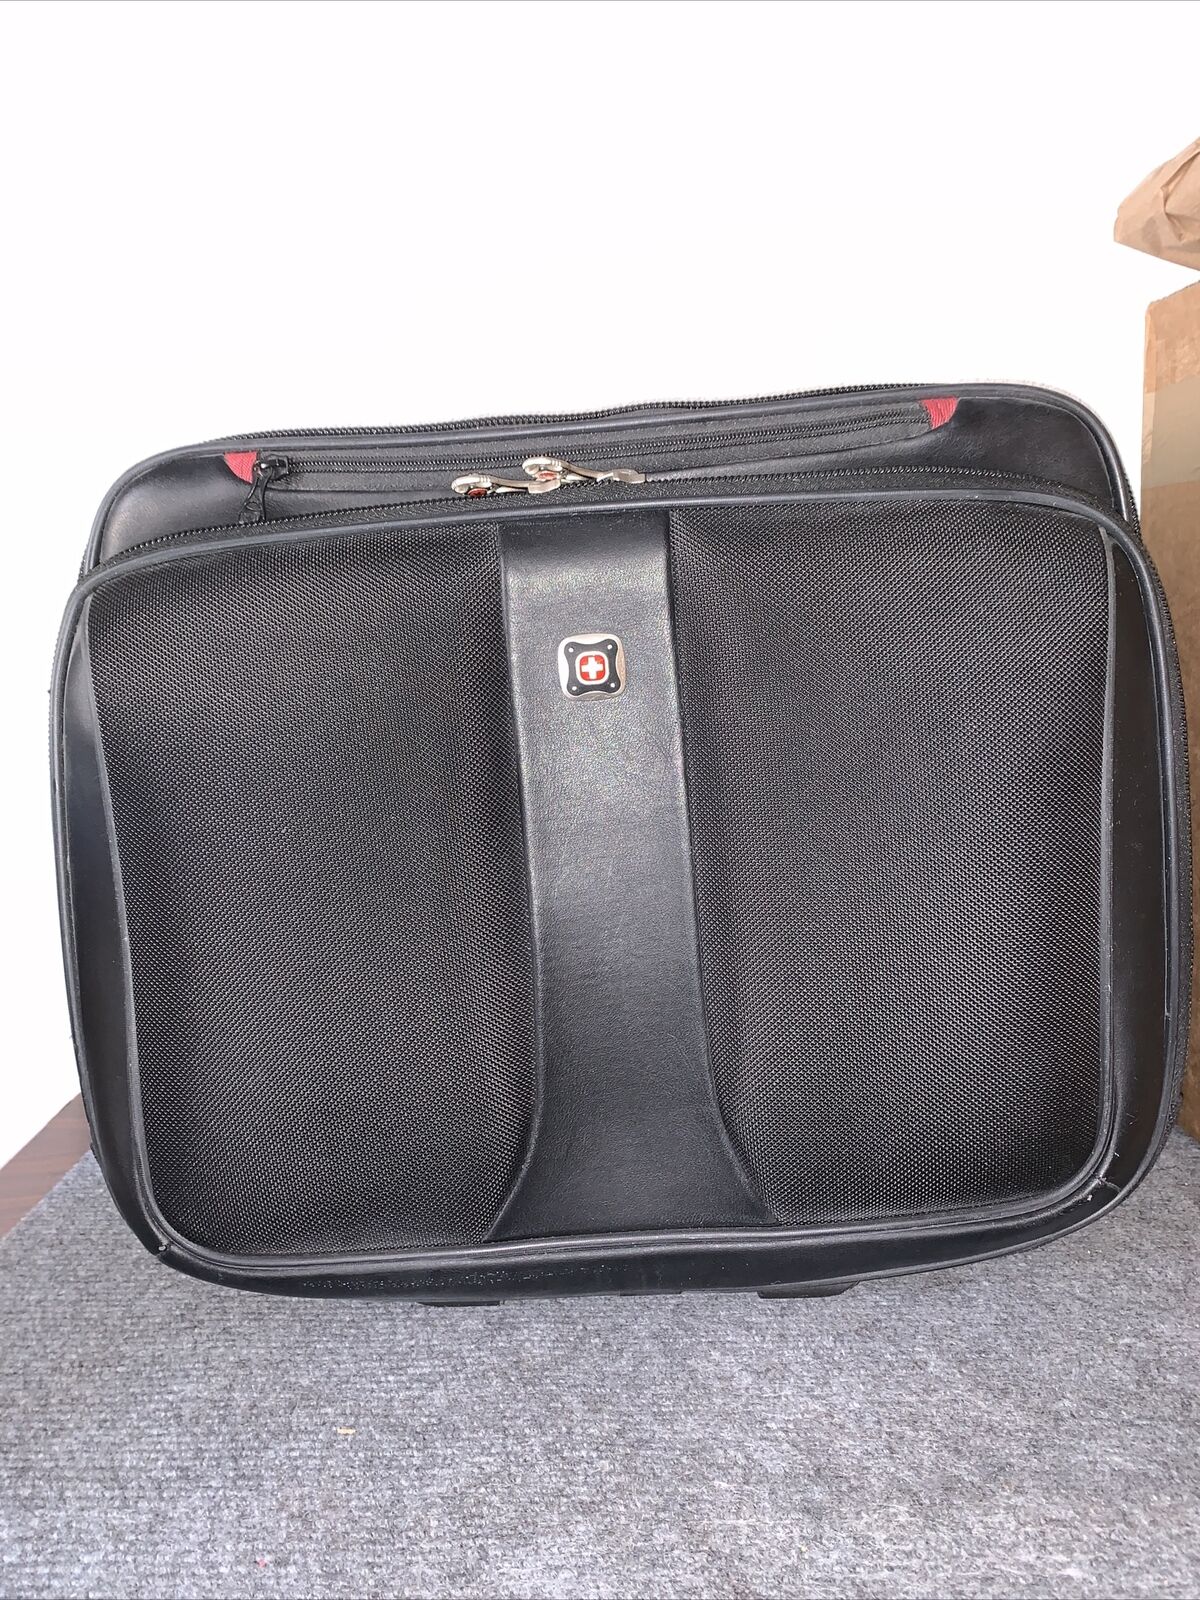 Swiss Gear Wenger Patriot Wheeled Business Case / Bag holds 17” laptop